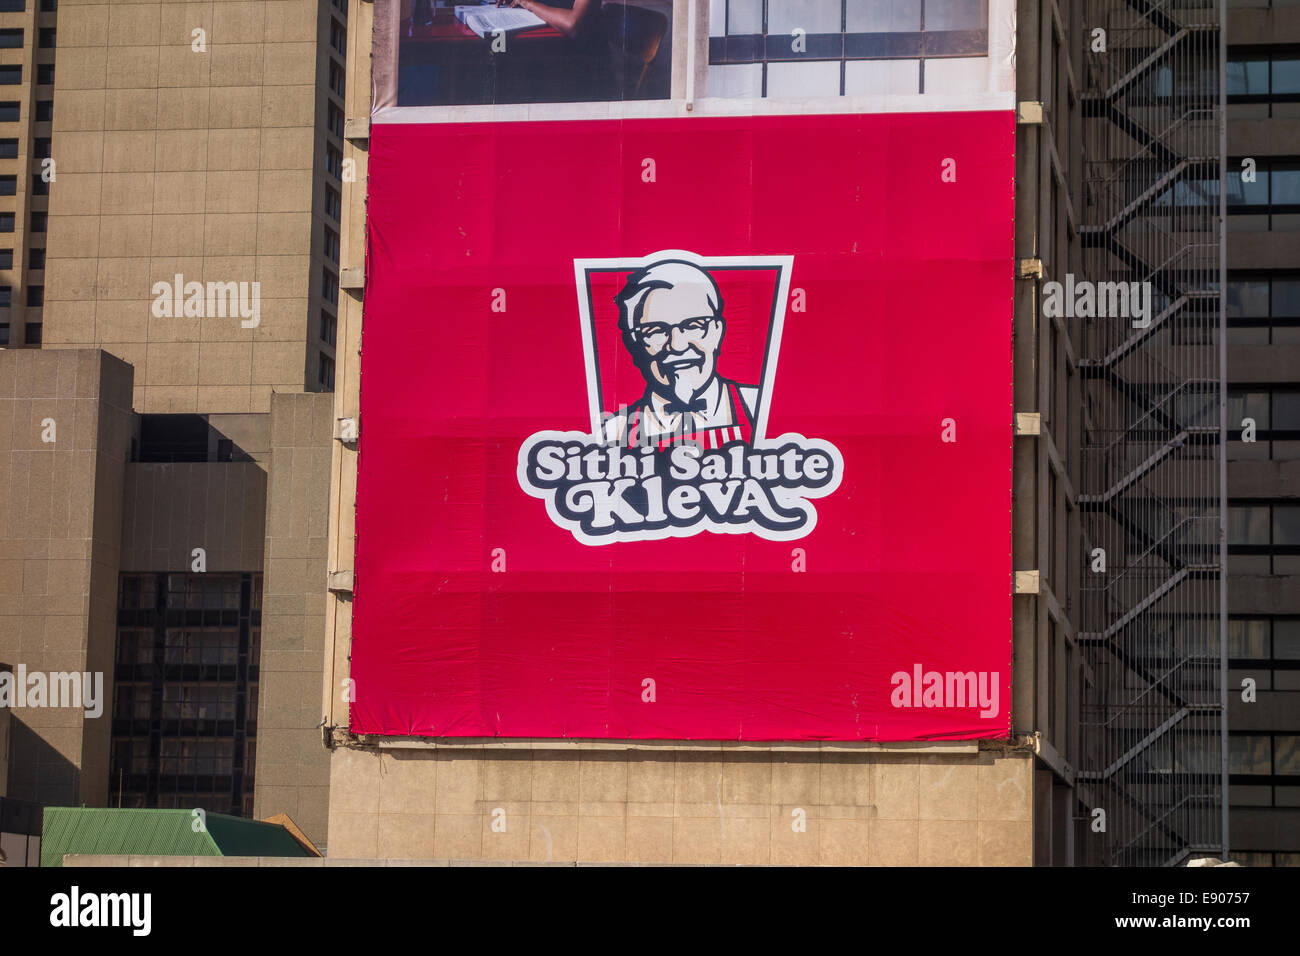 JOHANNESBURG, SOUTH AFRICA - Billboard advertisement for KFC Kentucky Fried Chicken, in Gandhi Square, in downtown city center. Stock Photo